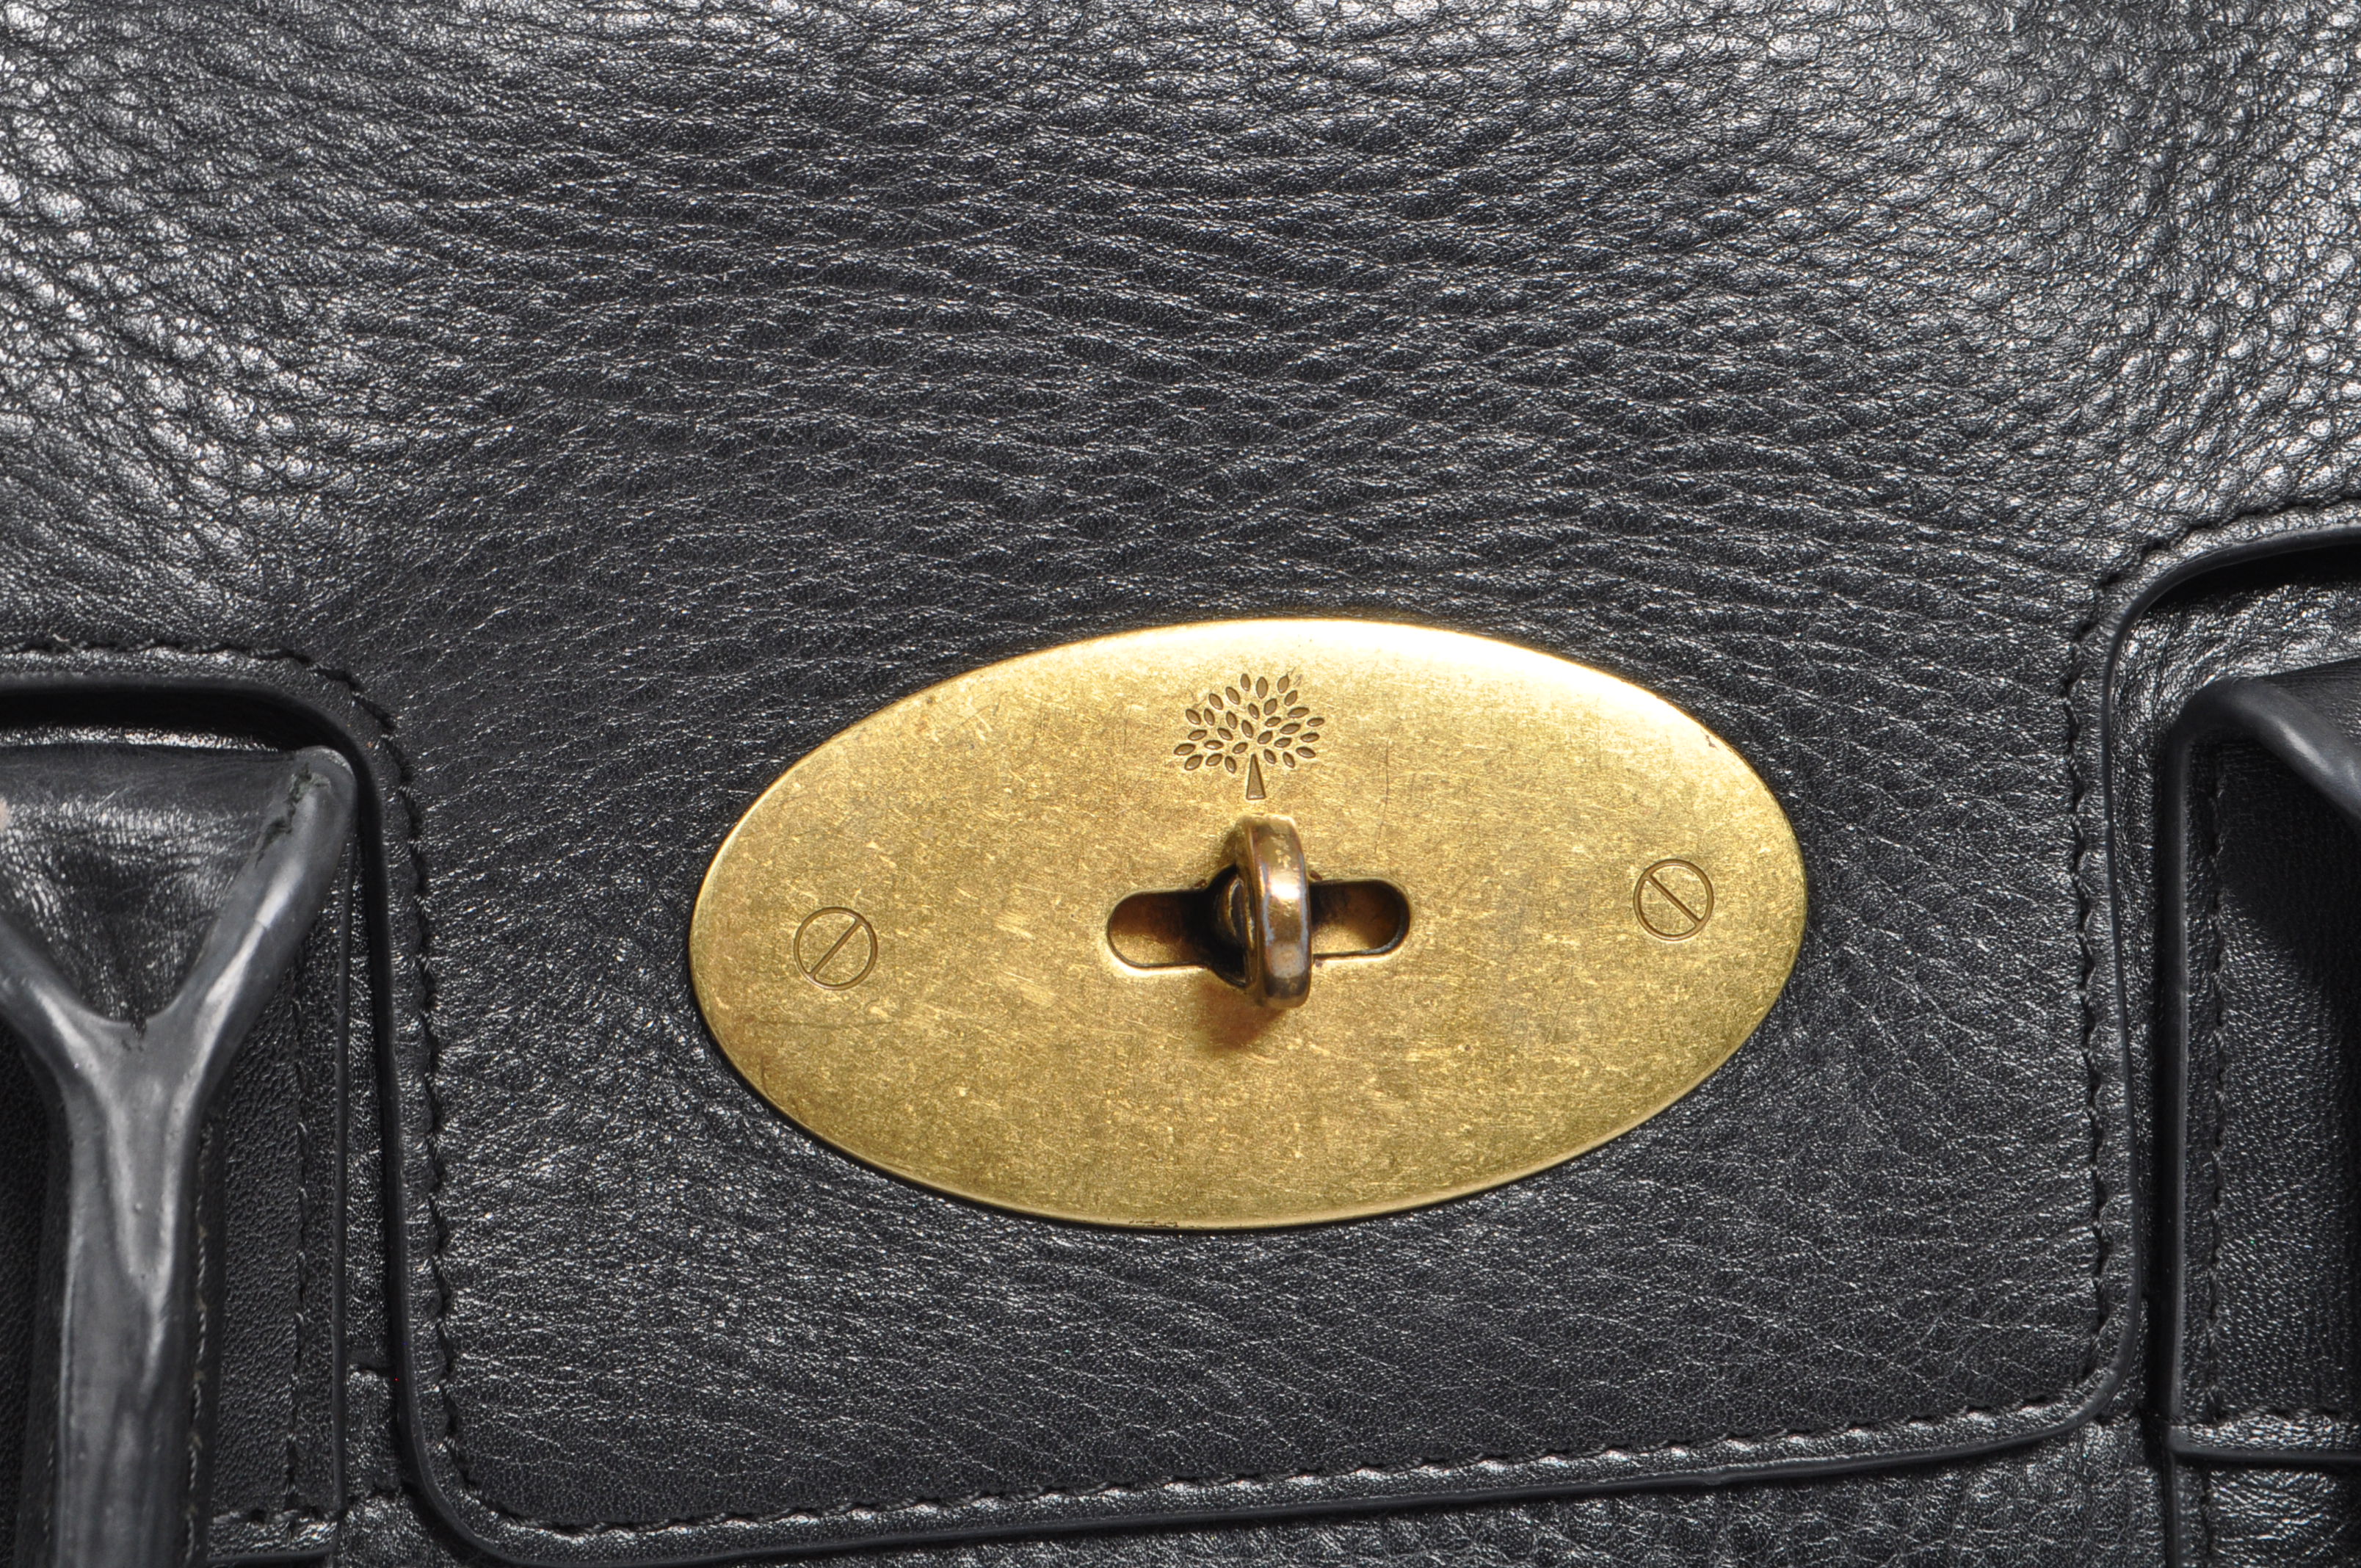 MULBERRY - CONTEMPORARY BAYSWATER LEATHER HANDBAG - Image 2 of 7